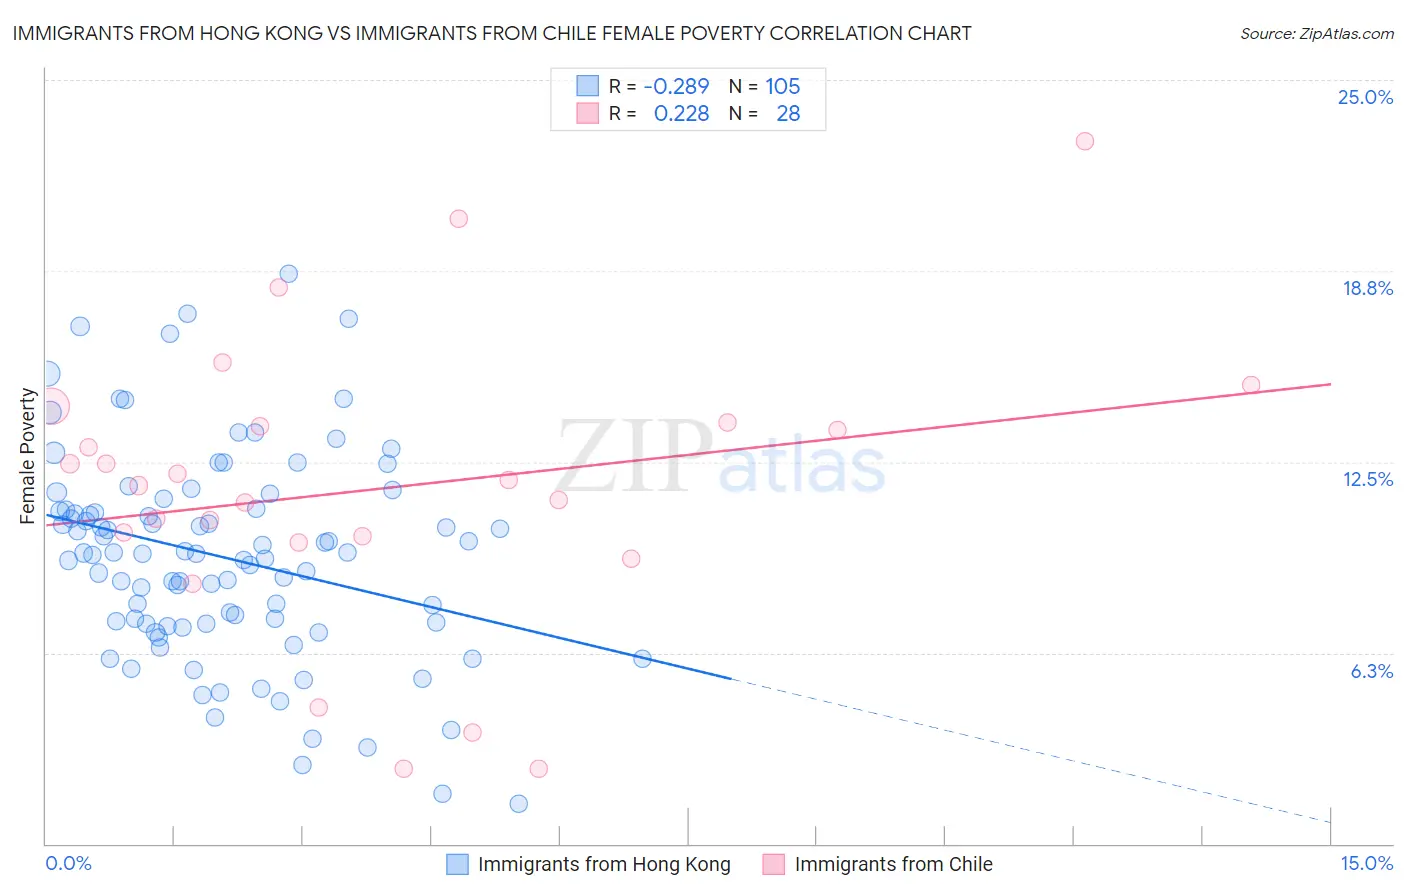 Immigrants from Hong Kong vs Immigrants from Chile Female Poverty